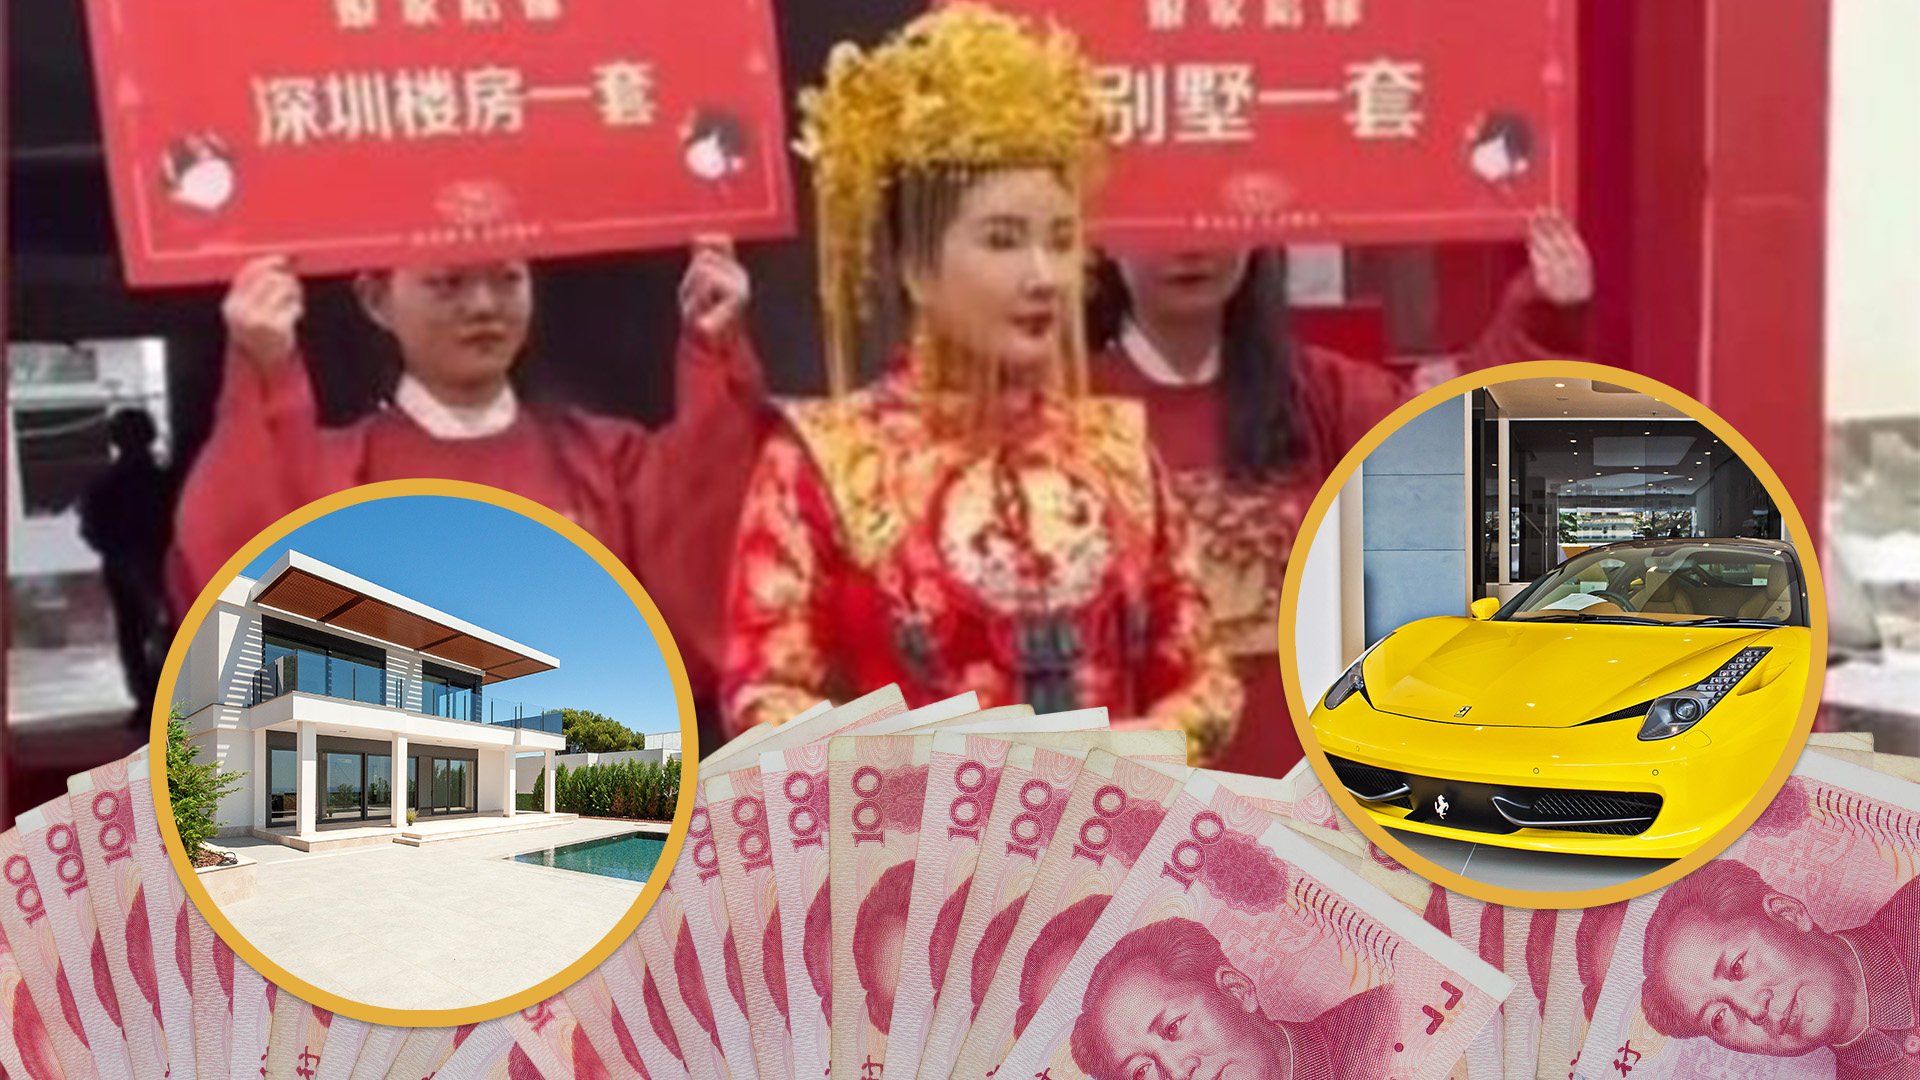 A millionaire bride in China has impressed mainland social media by showing off her substantial self-made dowry, which includes US$1.4 million in cash, a villa and a Ferrari sports car, on her wedding day. Photo: SCMP composite/Shutterstock/Douyin